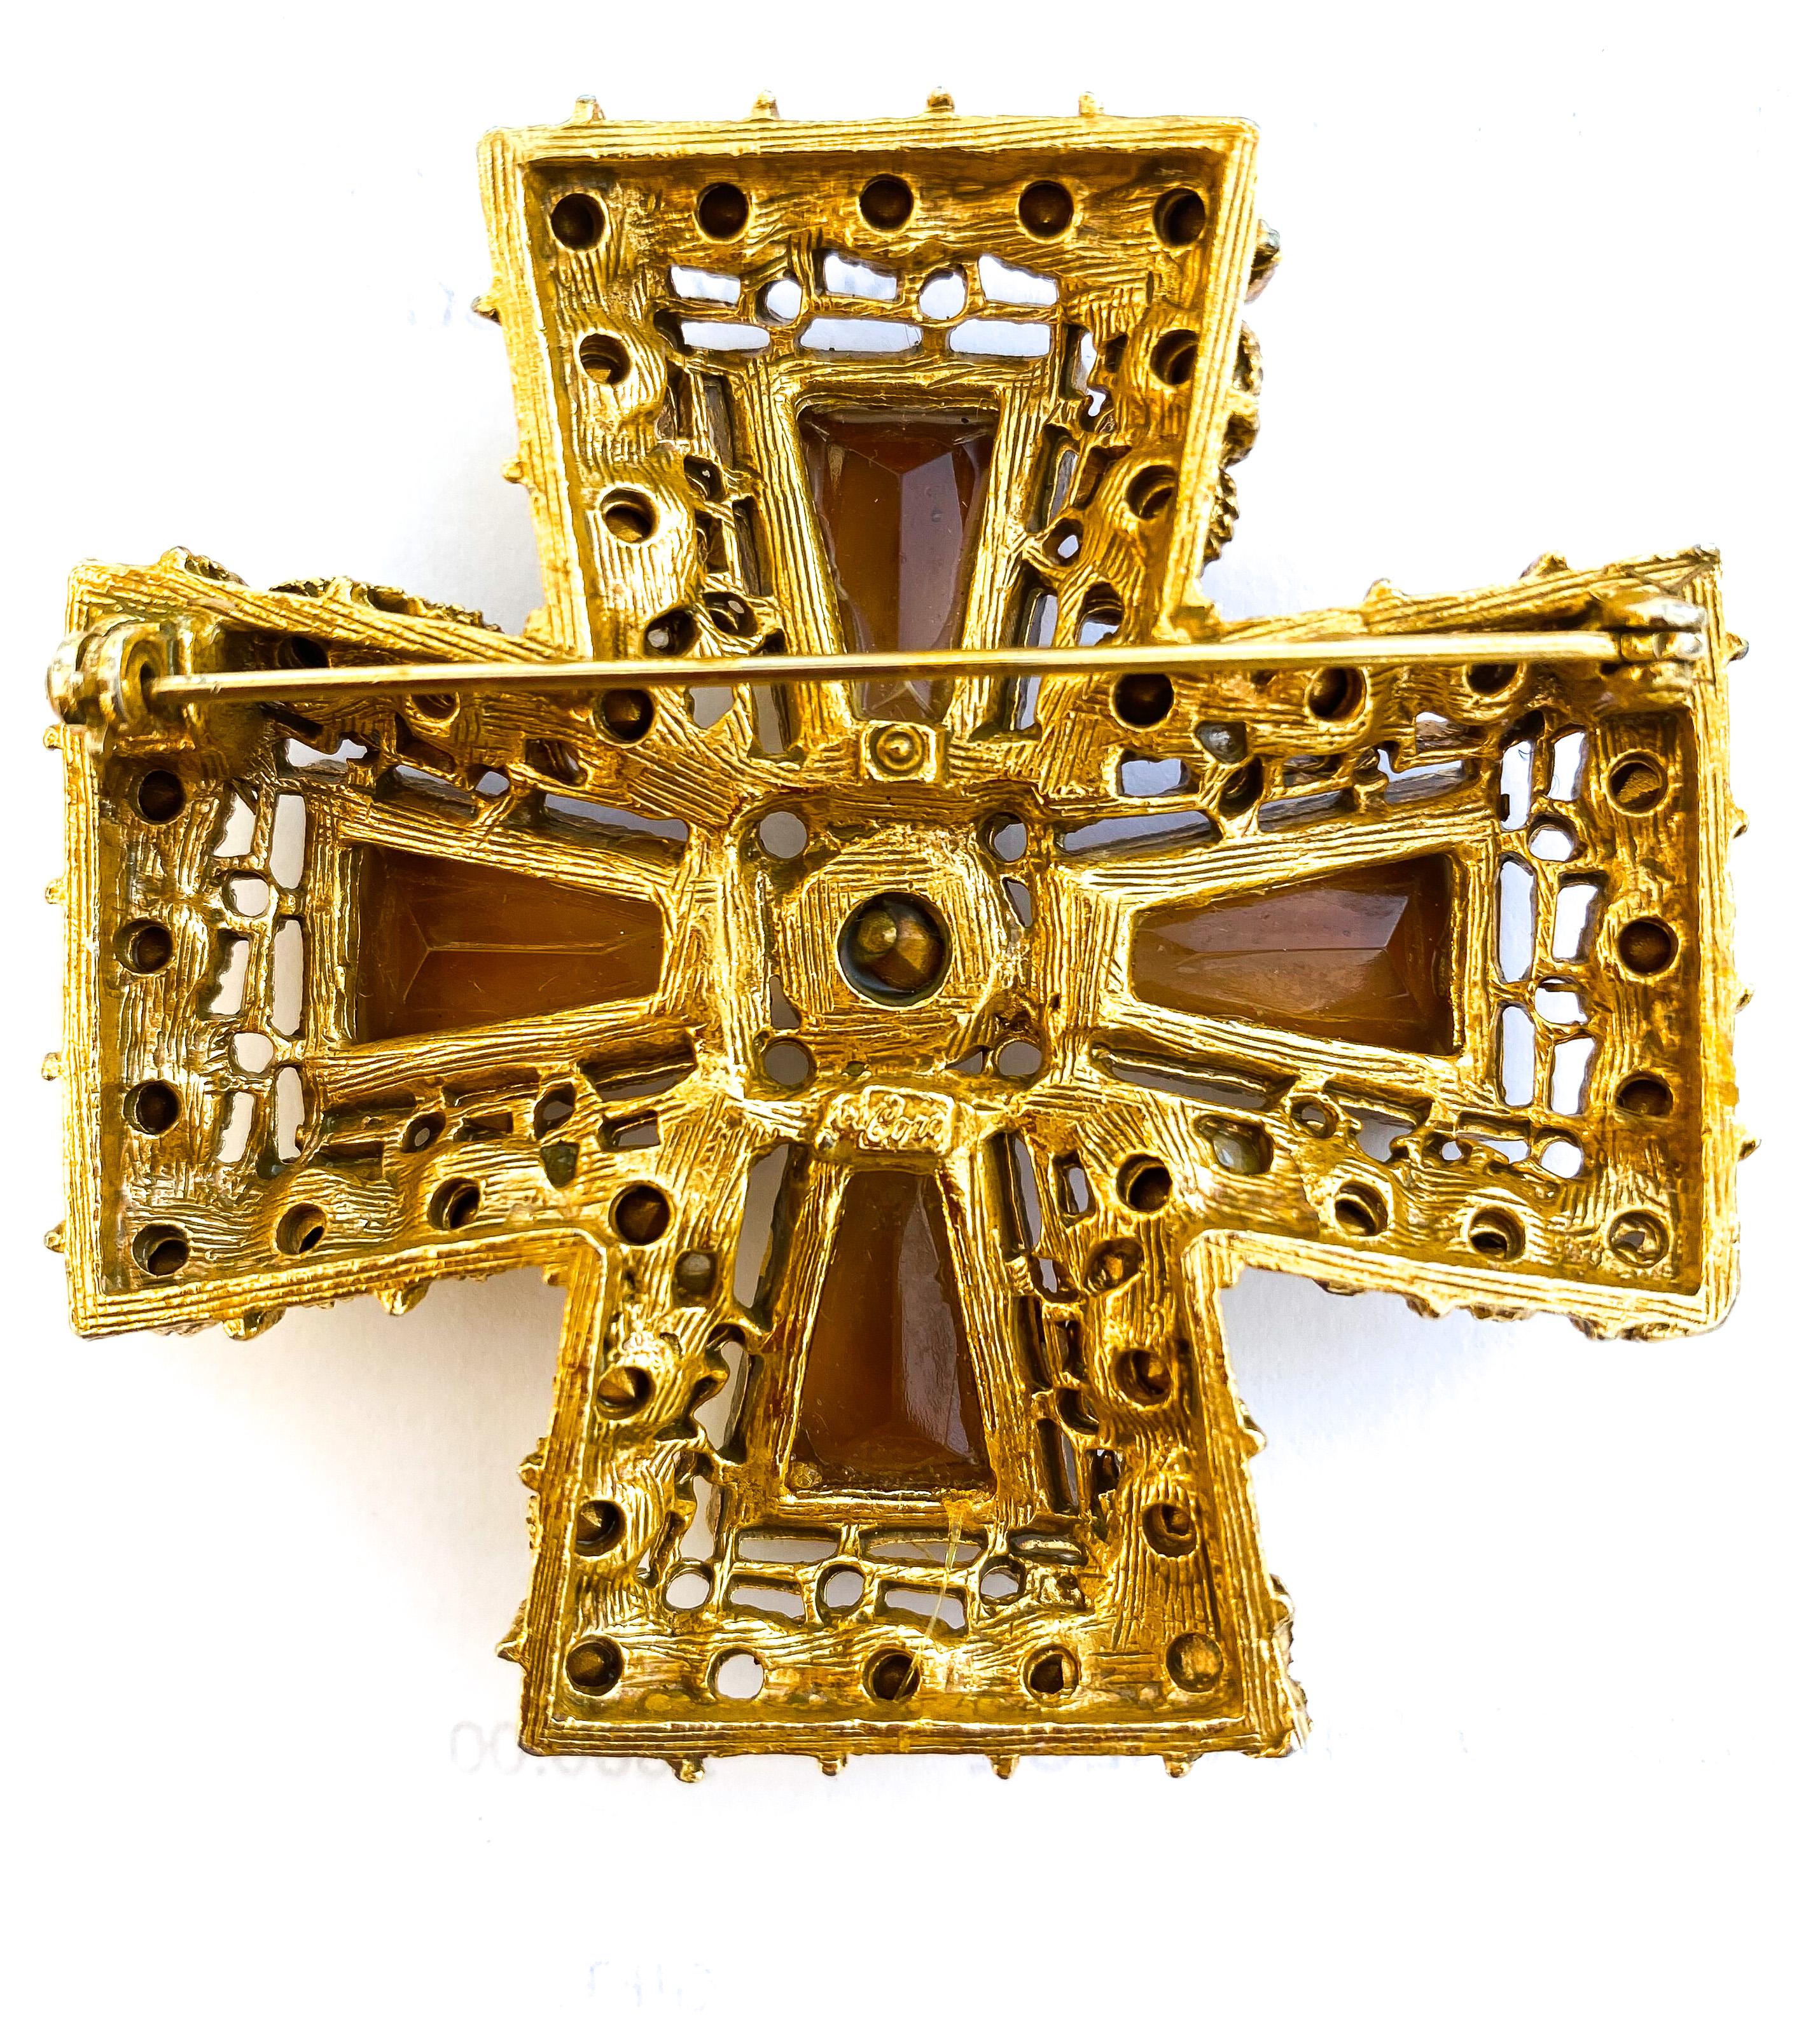 A striking and highly decorative brooch , in the form of a Maltese Cross, designed and manufactured by Coro, in the 1950s. Composed of four large faceted and tapered topaz glass stones, each is surrounded by citrine, topaz and soft grey pastes, with